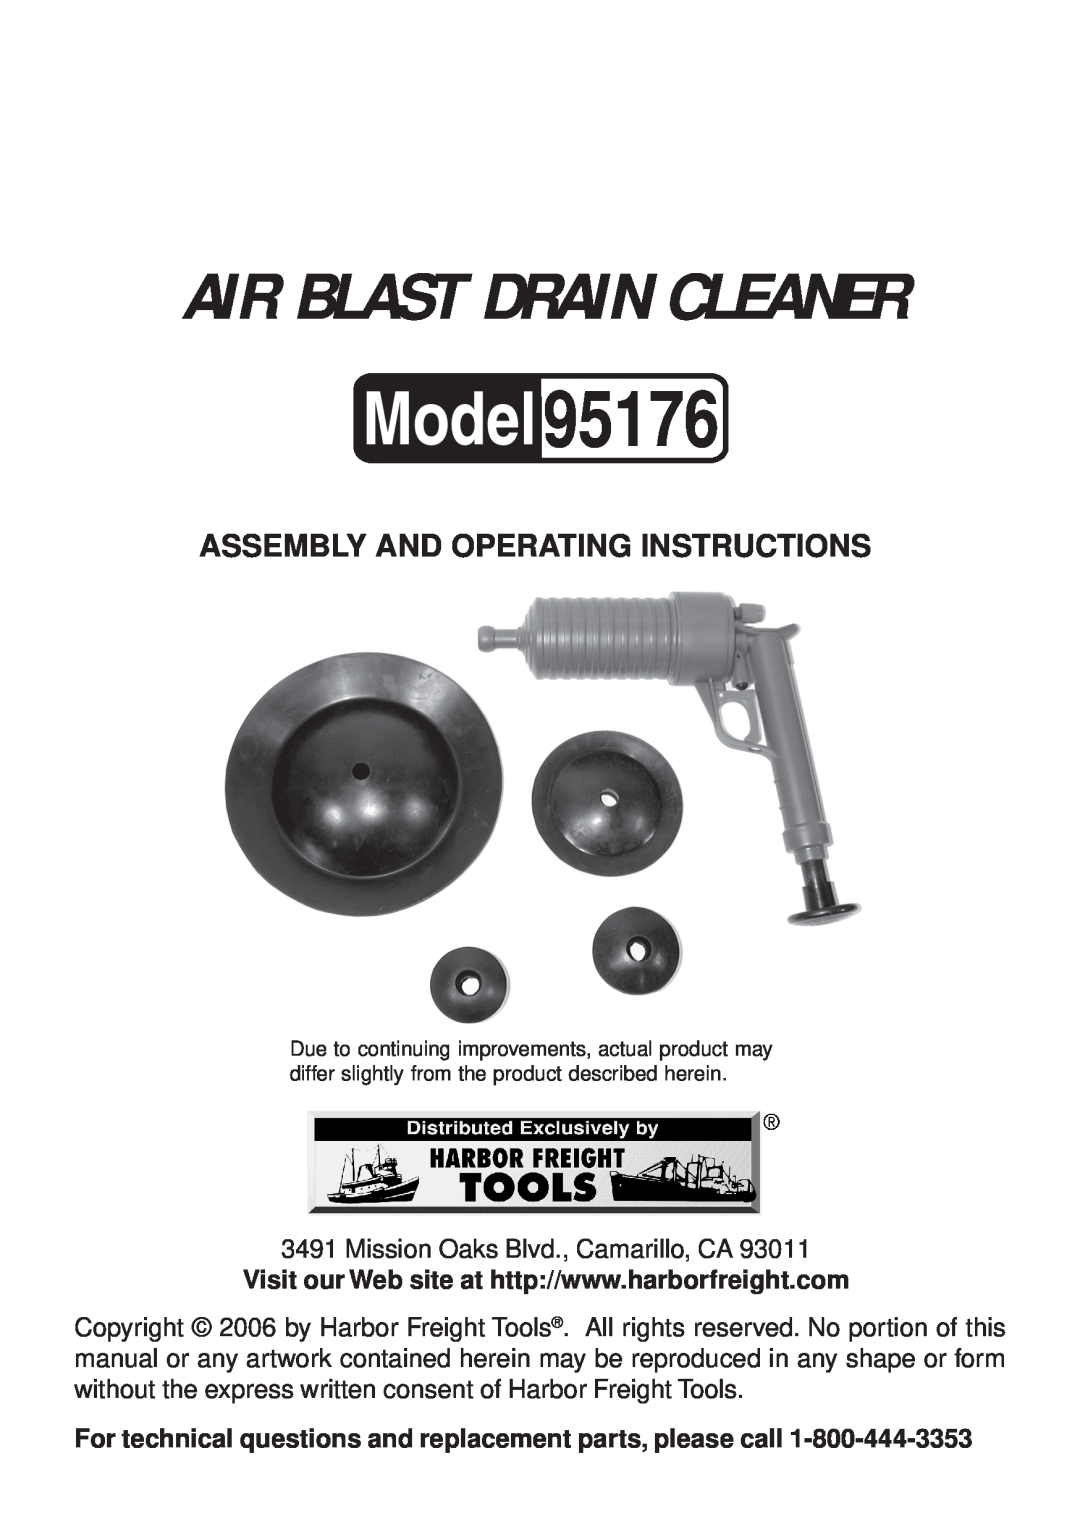 Harbor Freight Tools 95176 manual Assembly And Operating Instructions, Air Blast Drain Cleaner 